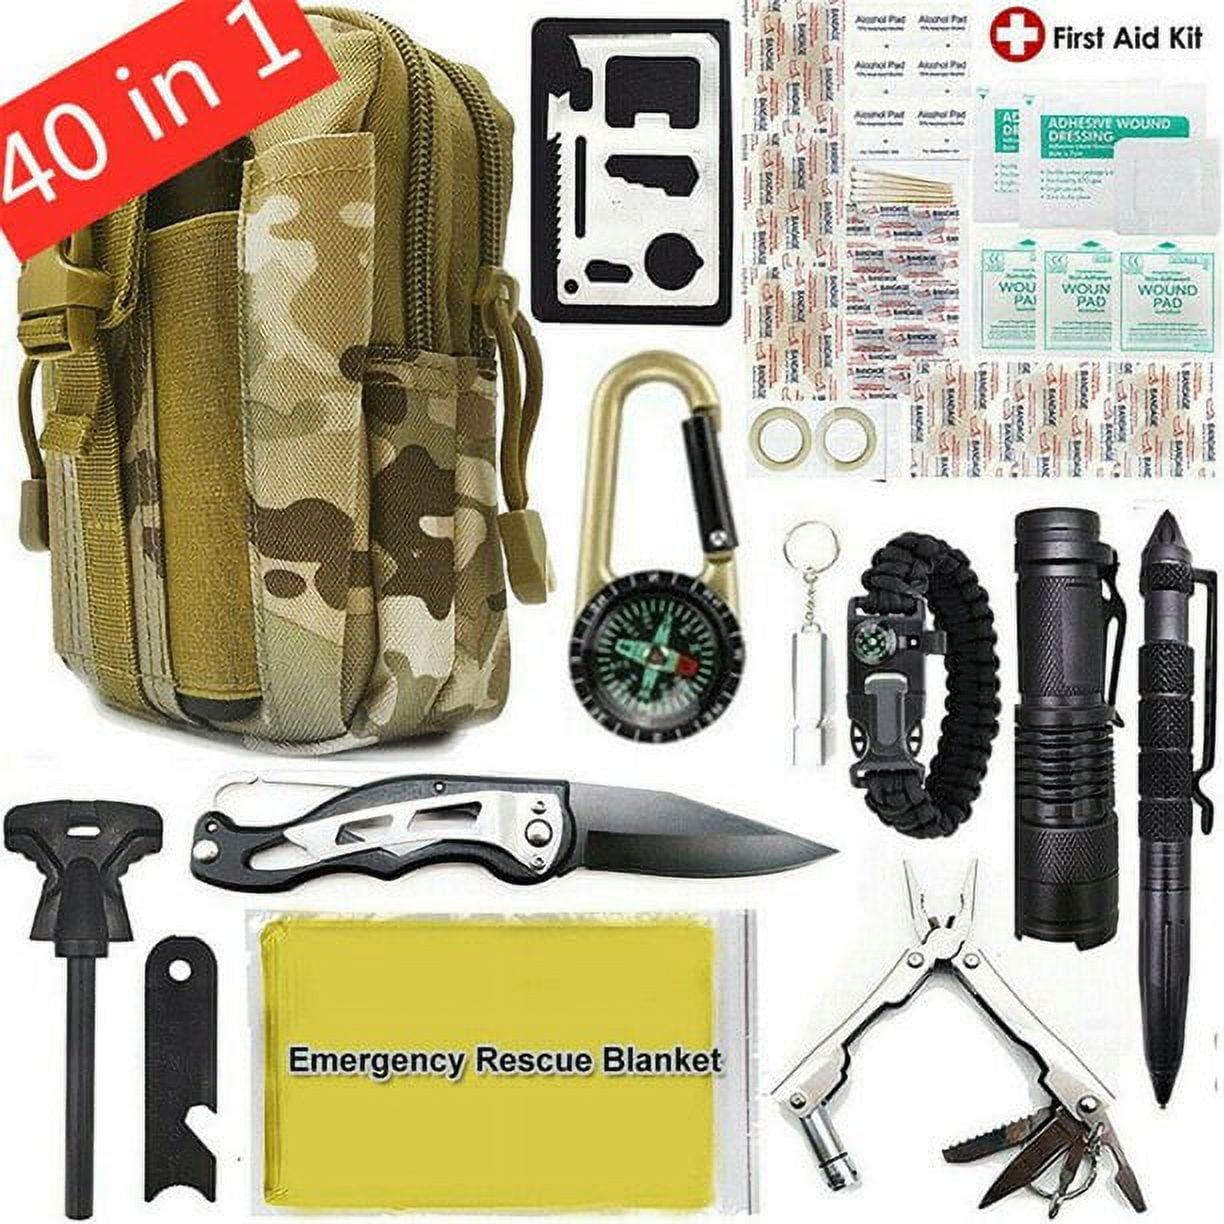 Emergency Survival Gear Kit, MDHAND 40-In-1 Survival Gear, And Equipment,  With First Aid Compass Knife Tactical Tools, Backpacking, Outdoor Camping  Hiking Bikes Husbands/ Boyfriends/ Fathers, HD196 